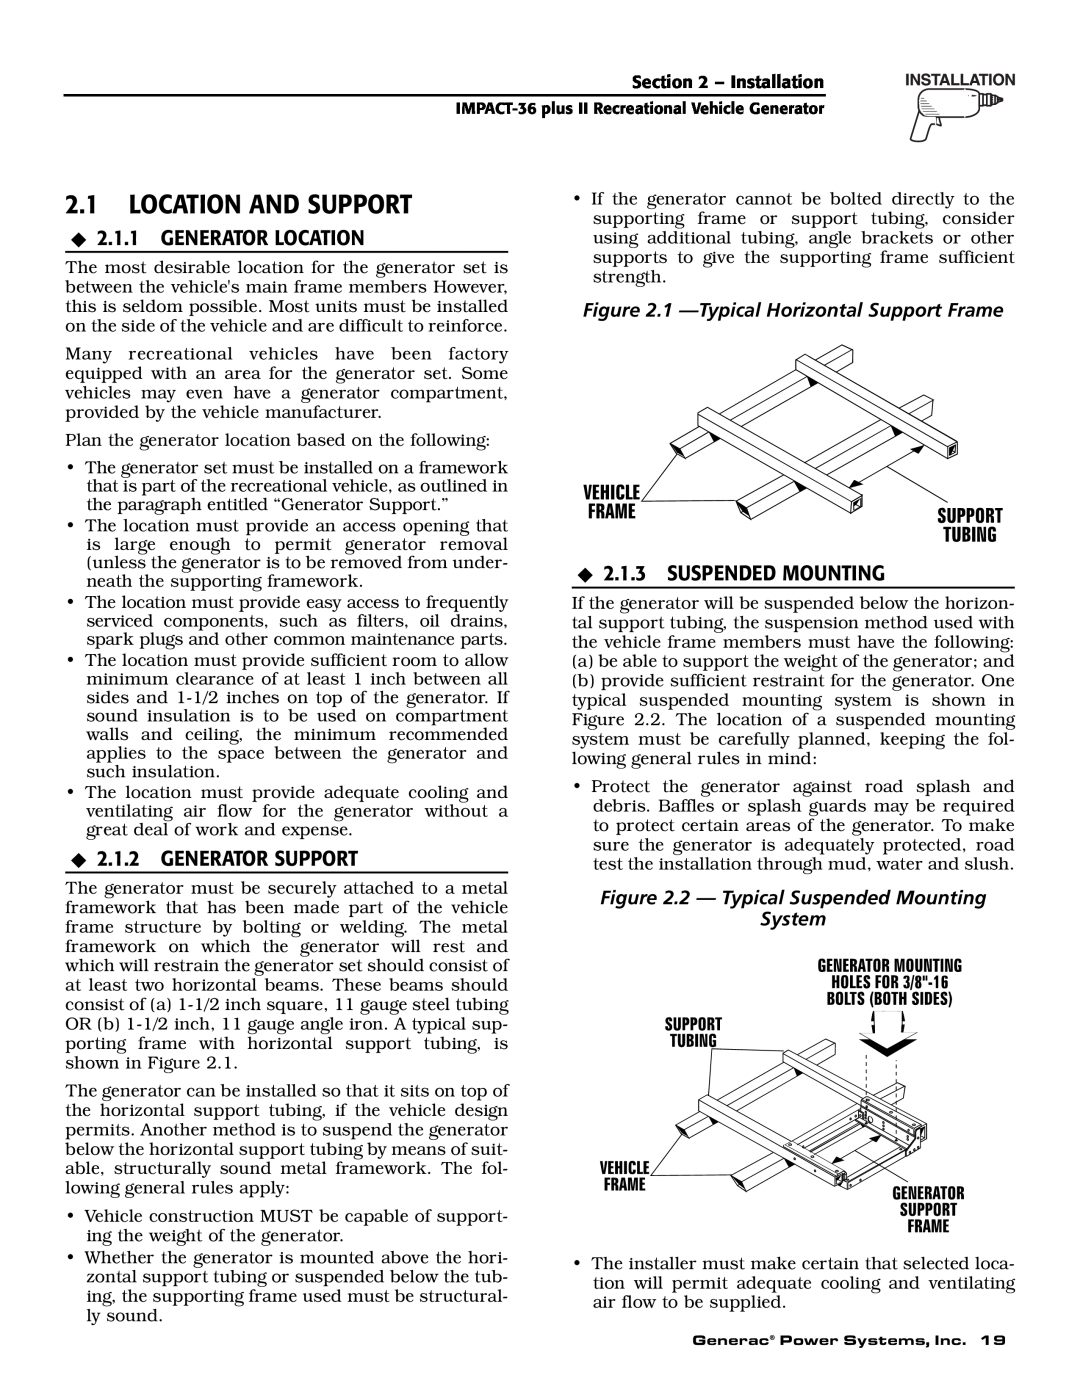 Generac 00941-3 owner manual 2.1LOCATION AND SUPPORT, Generator Location, Generator Support, Suspended Mounting 